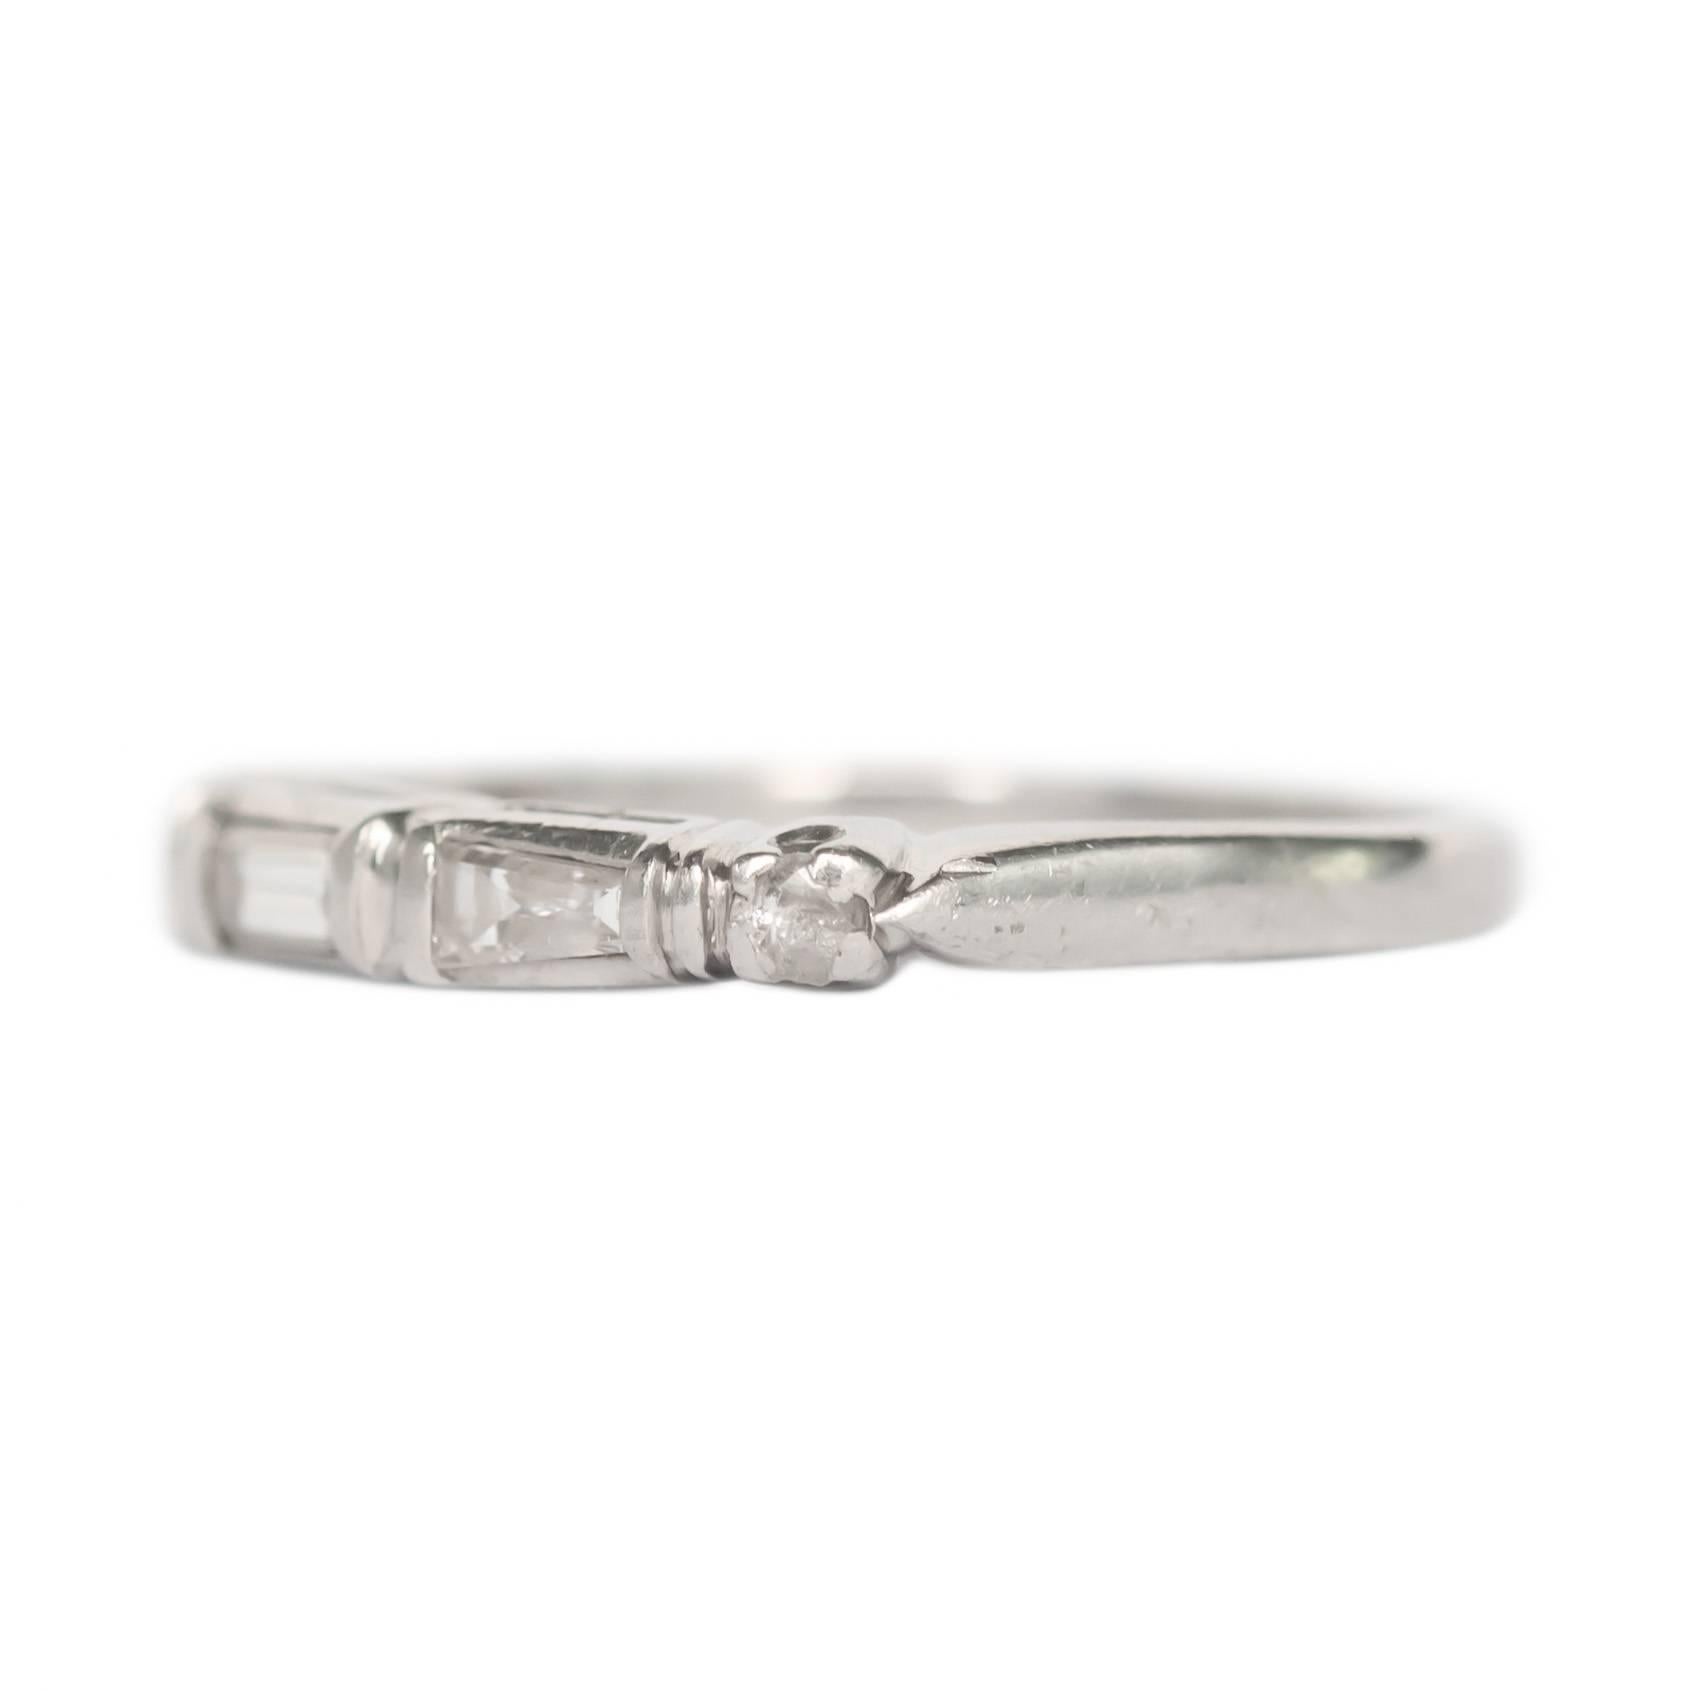 Item Details: 
Ring Size: 6.25
Metal Type: Platinum 
Weight: 2.8 grams

Side Stone Details: 
Shape: Baguette and Round Brilliant 
Total Carat Weight: .25 carat total weight
Color: F
Clarity: VS

Finger to Top of Stone Measurement: 2.74mm